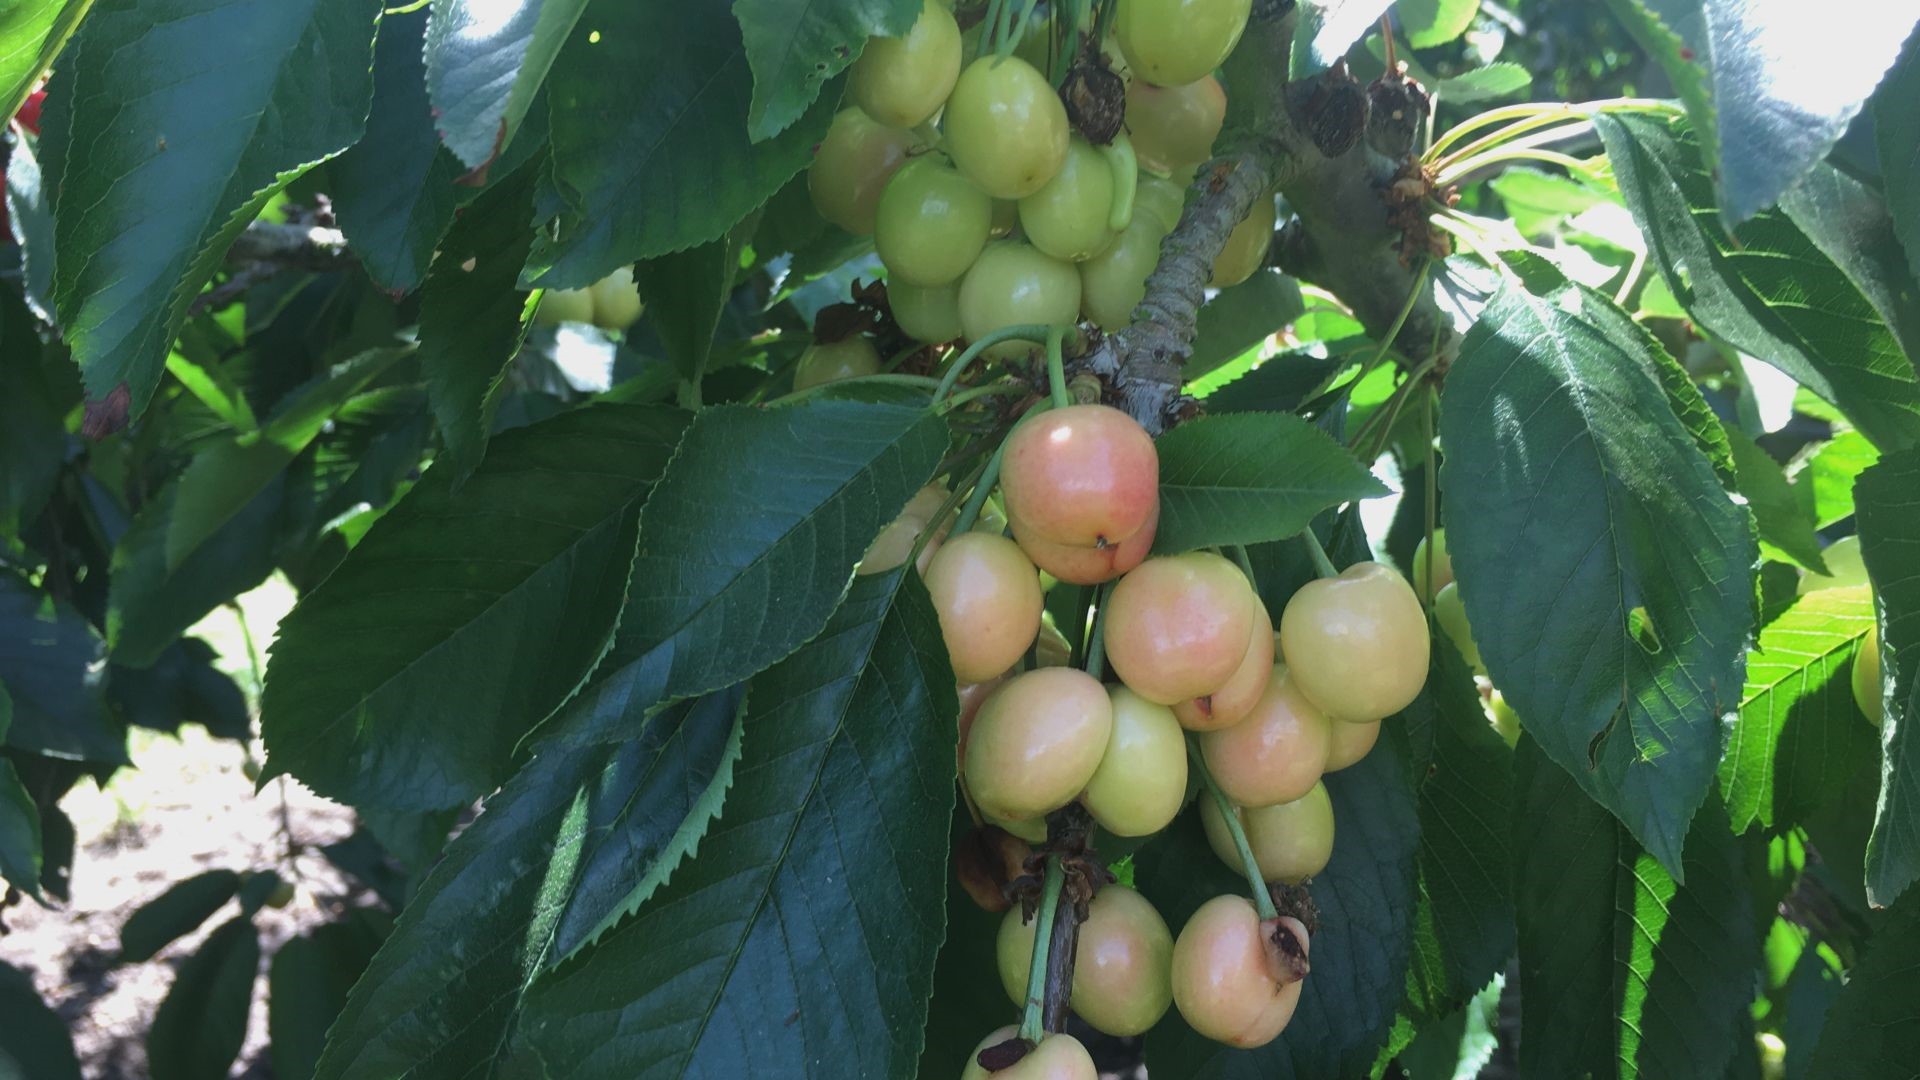 The cherries in Linden and Lodi are nearly ready for harvest, but some wet weather in the forecast could be harmful to the popular fruit.